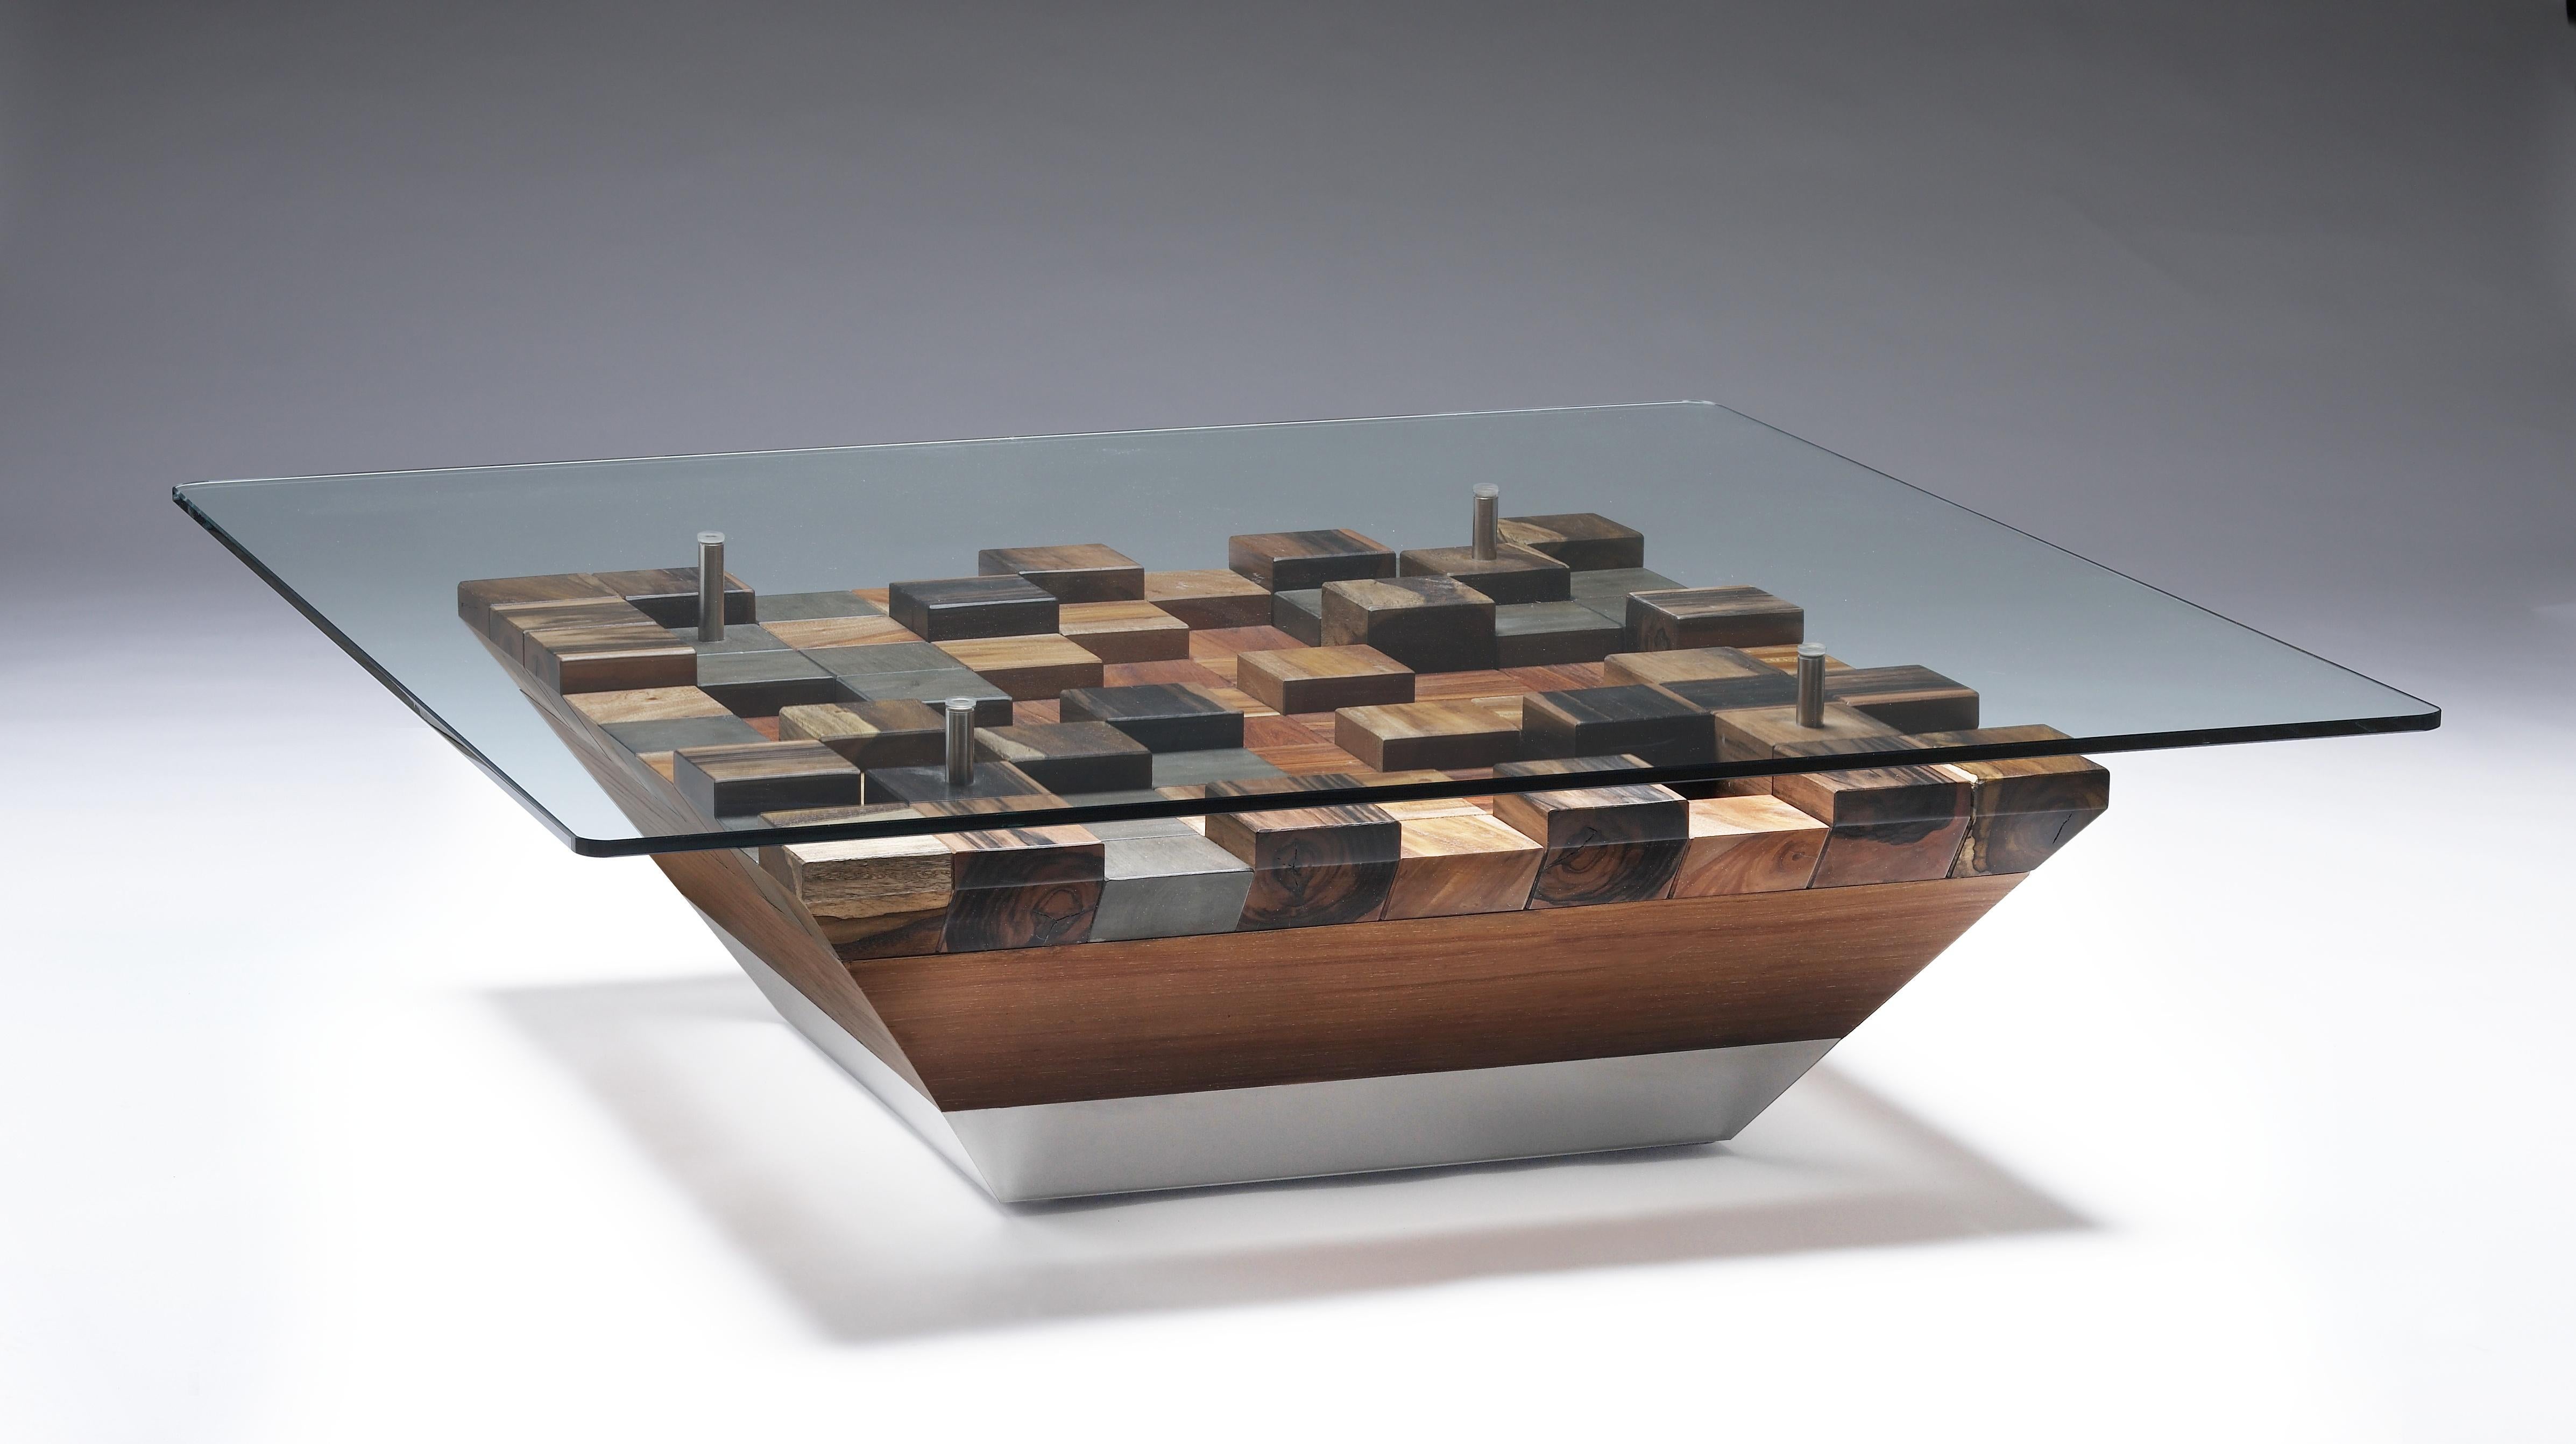 The base of this glass-top table is crafted from an intriguing combination of woods and stainless steel, forming captivating geometric shapes. This unconventional design adds a distinctiveness to the piece, making it truly remarkable. The use of